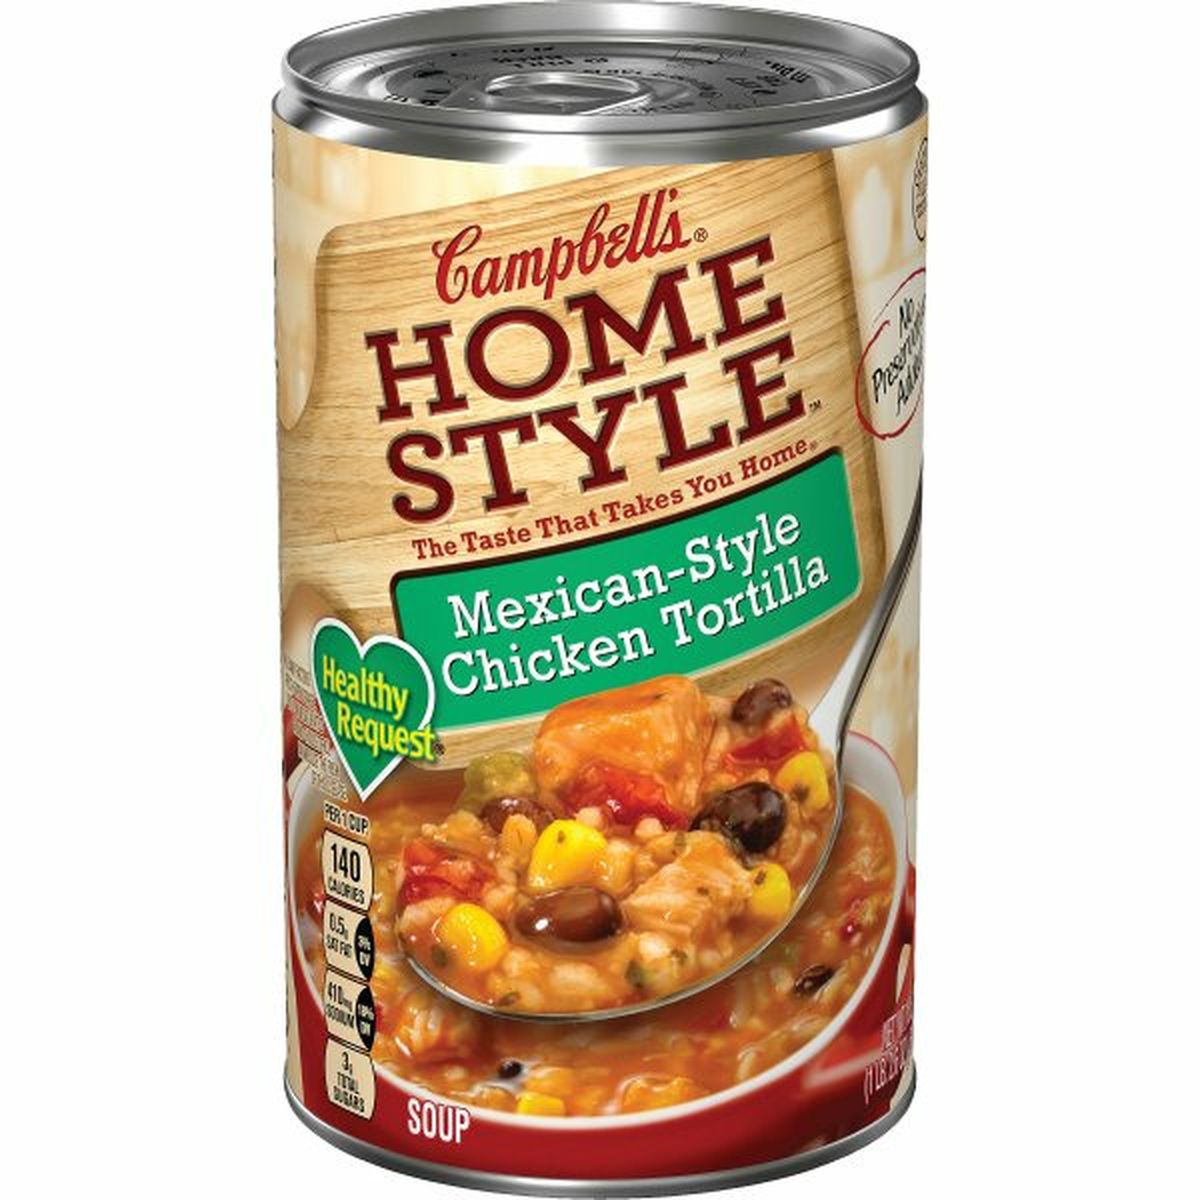 Calories in Campbell'ss Homestyle Healthy Requests Homestyle Healthy Request Mexican-Style Chicken TortillaSoup